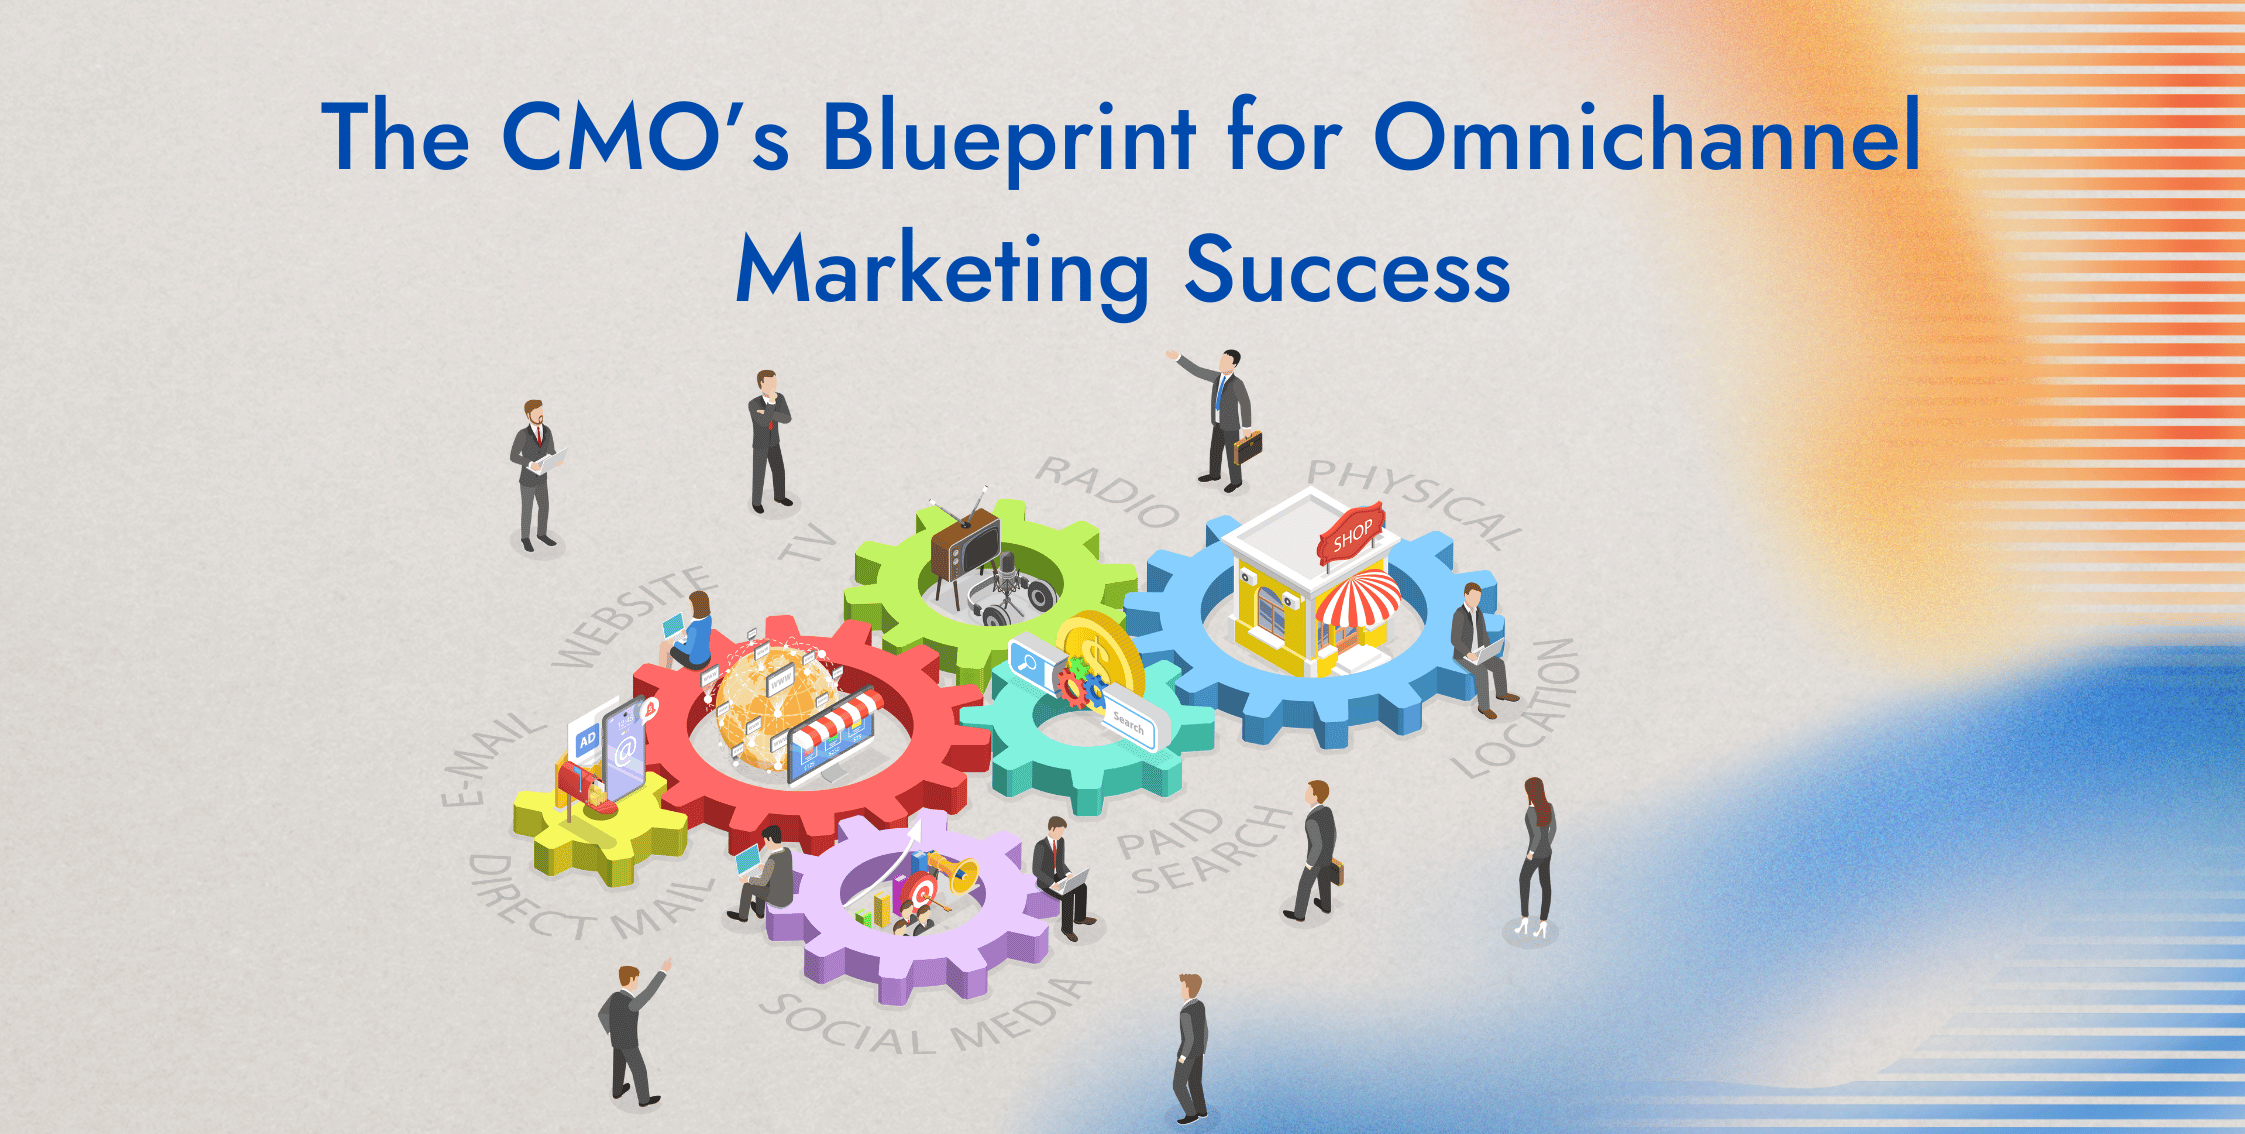 The CMO’s Blueprint for Omnichannel Marketing Success